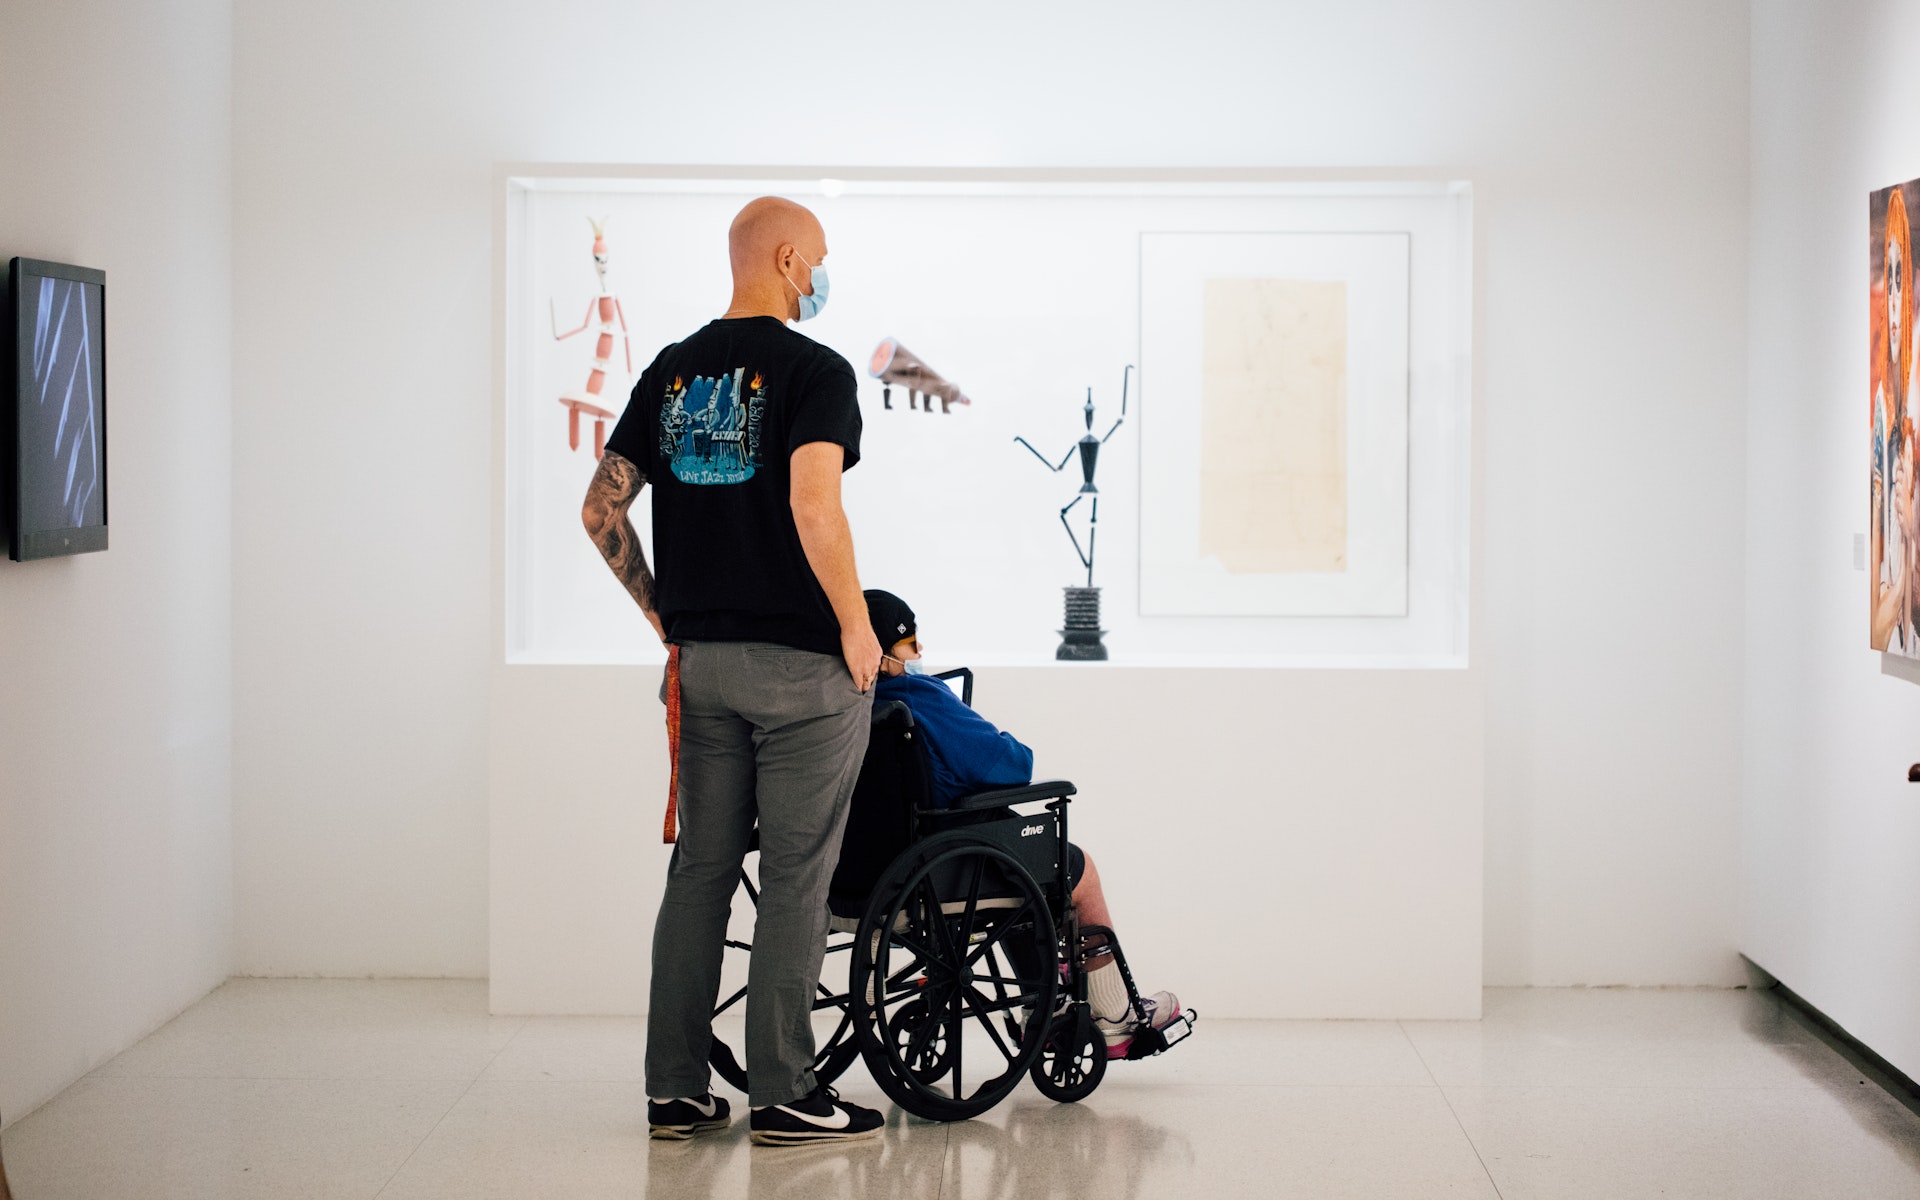 One person who is standing and another person who is in a wheelchair looking at art in a gallery, seen from behind